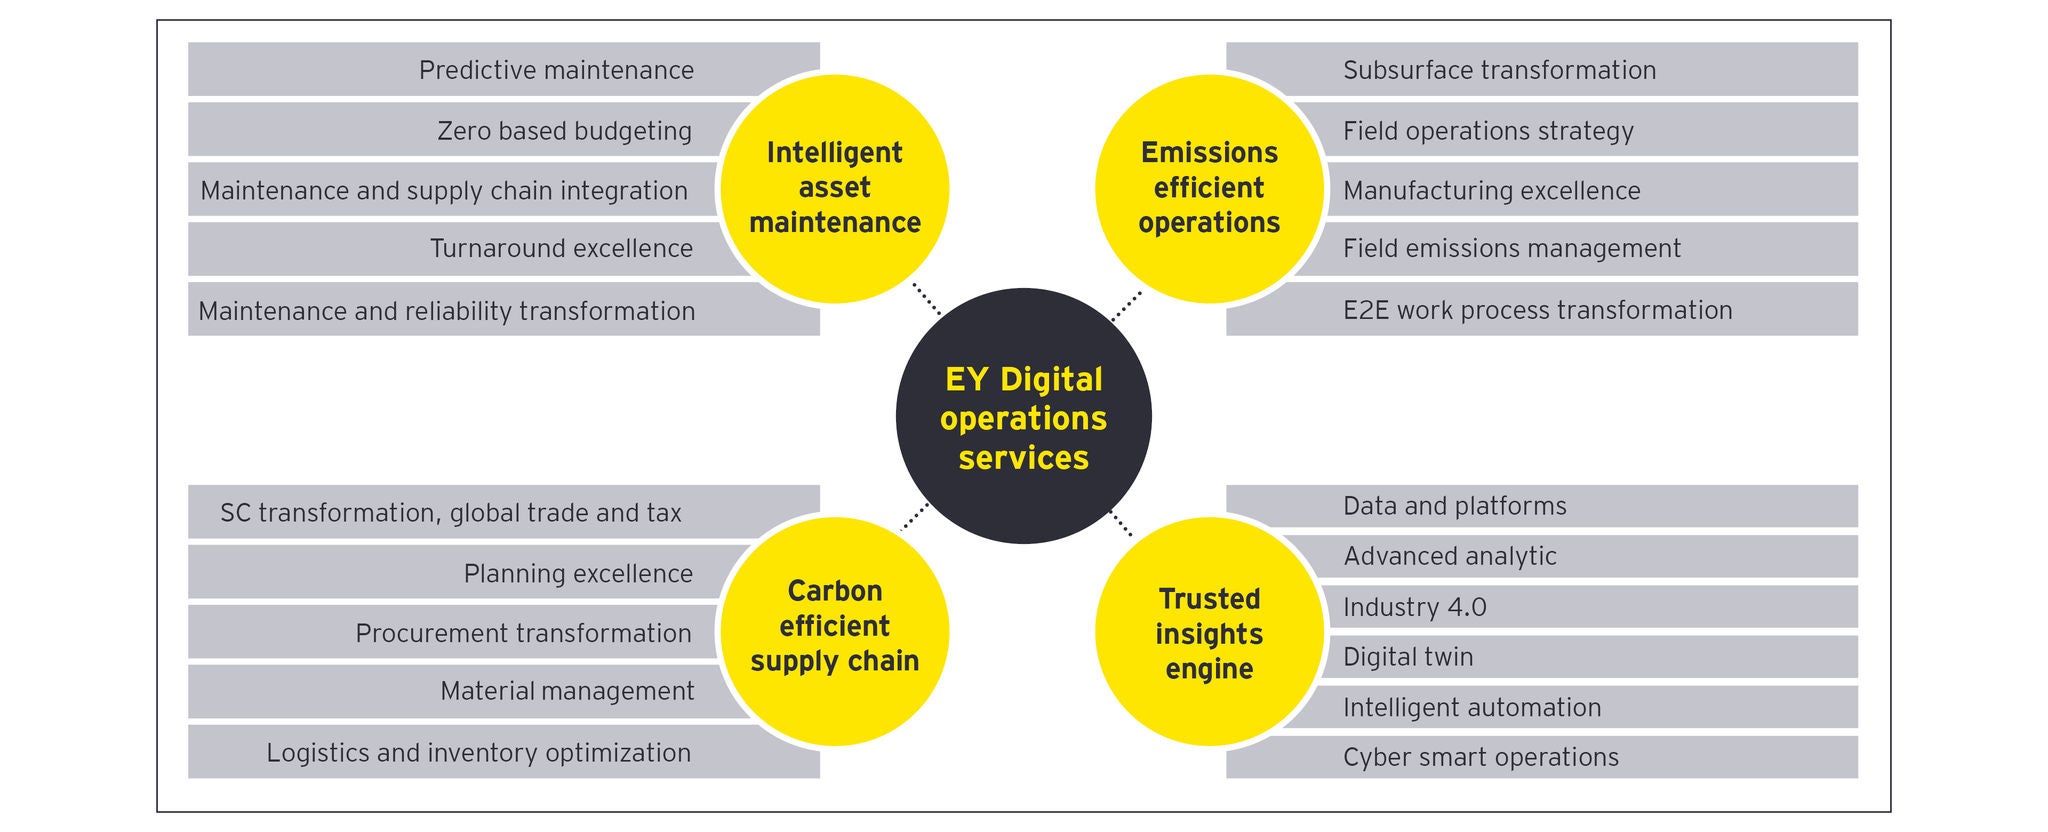 EY’s Digital operations services